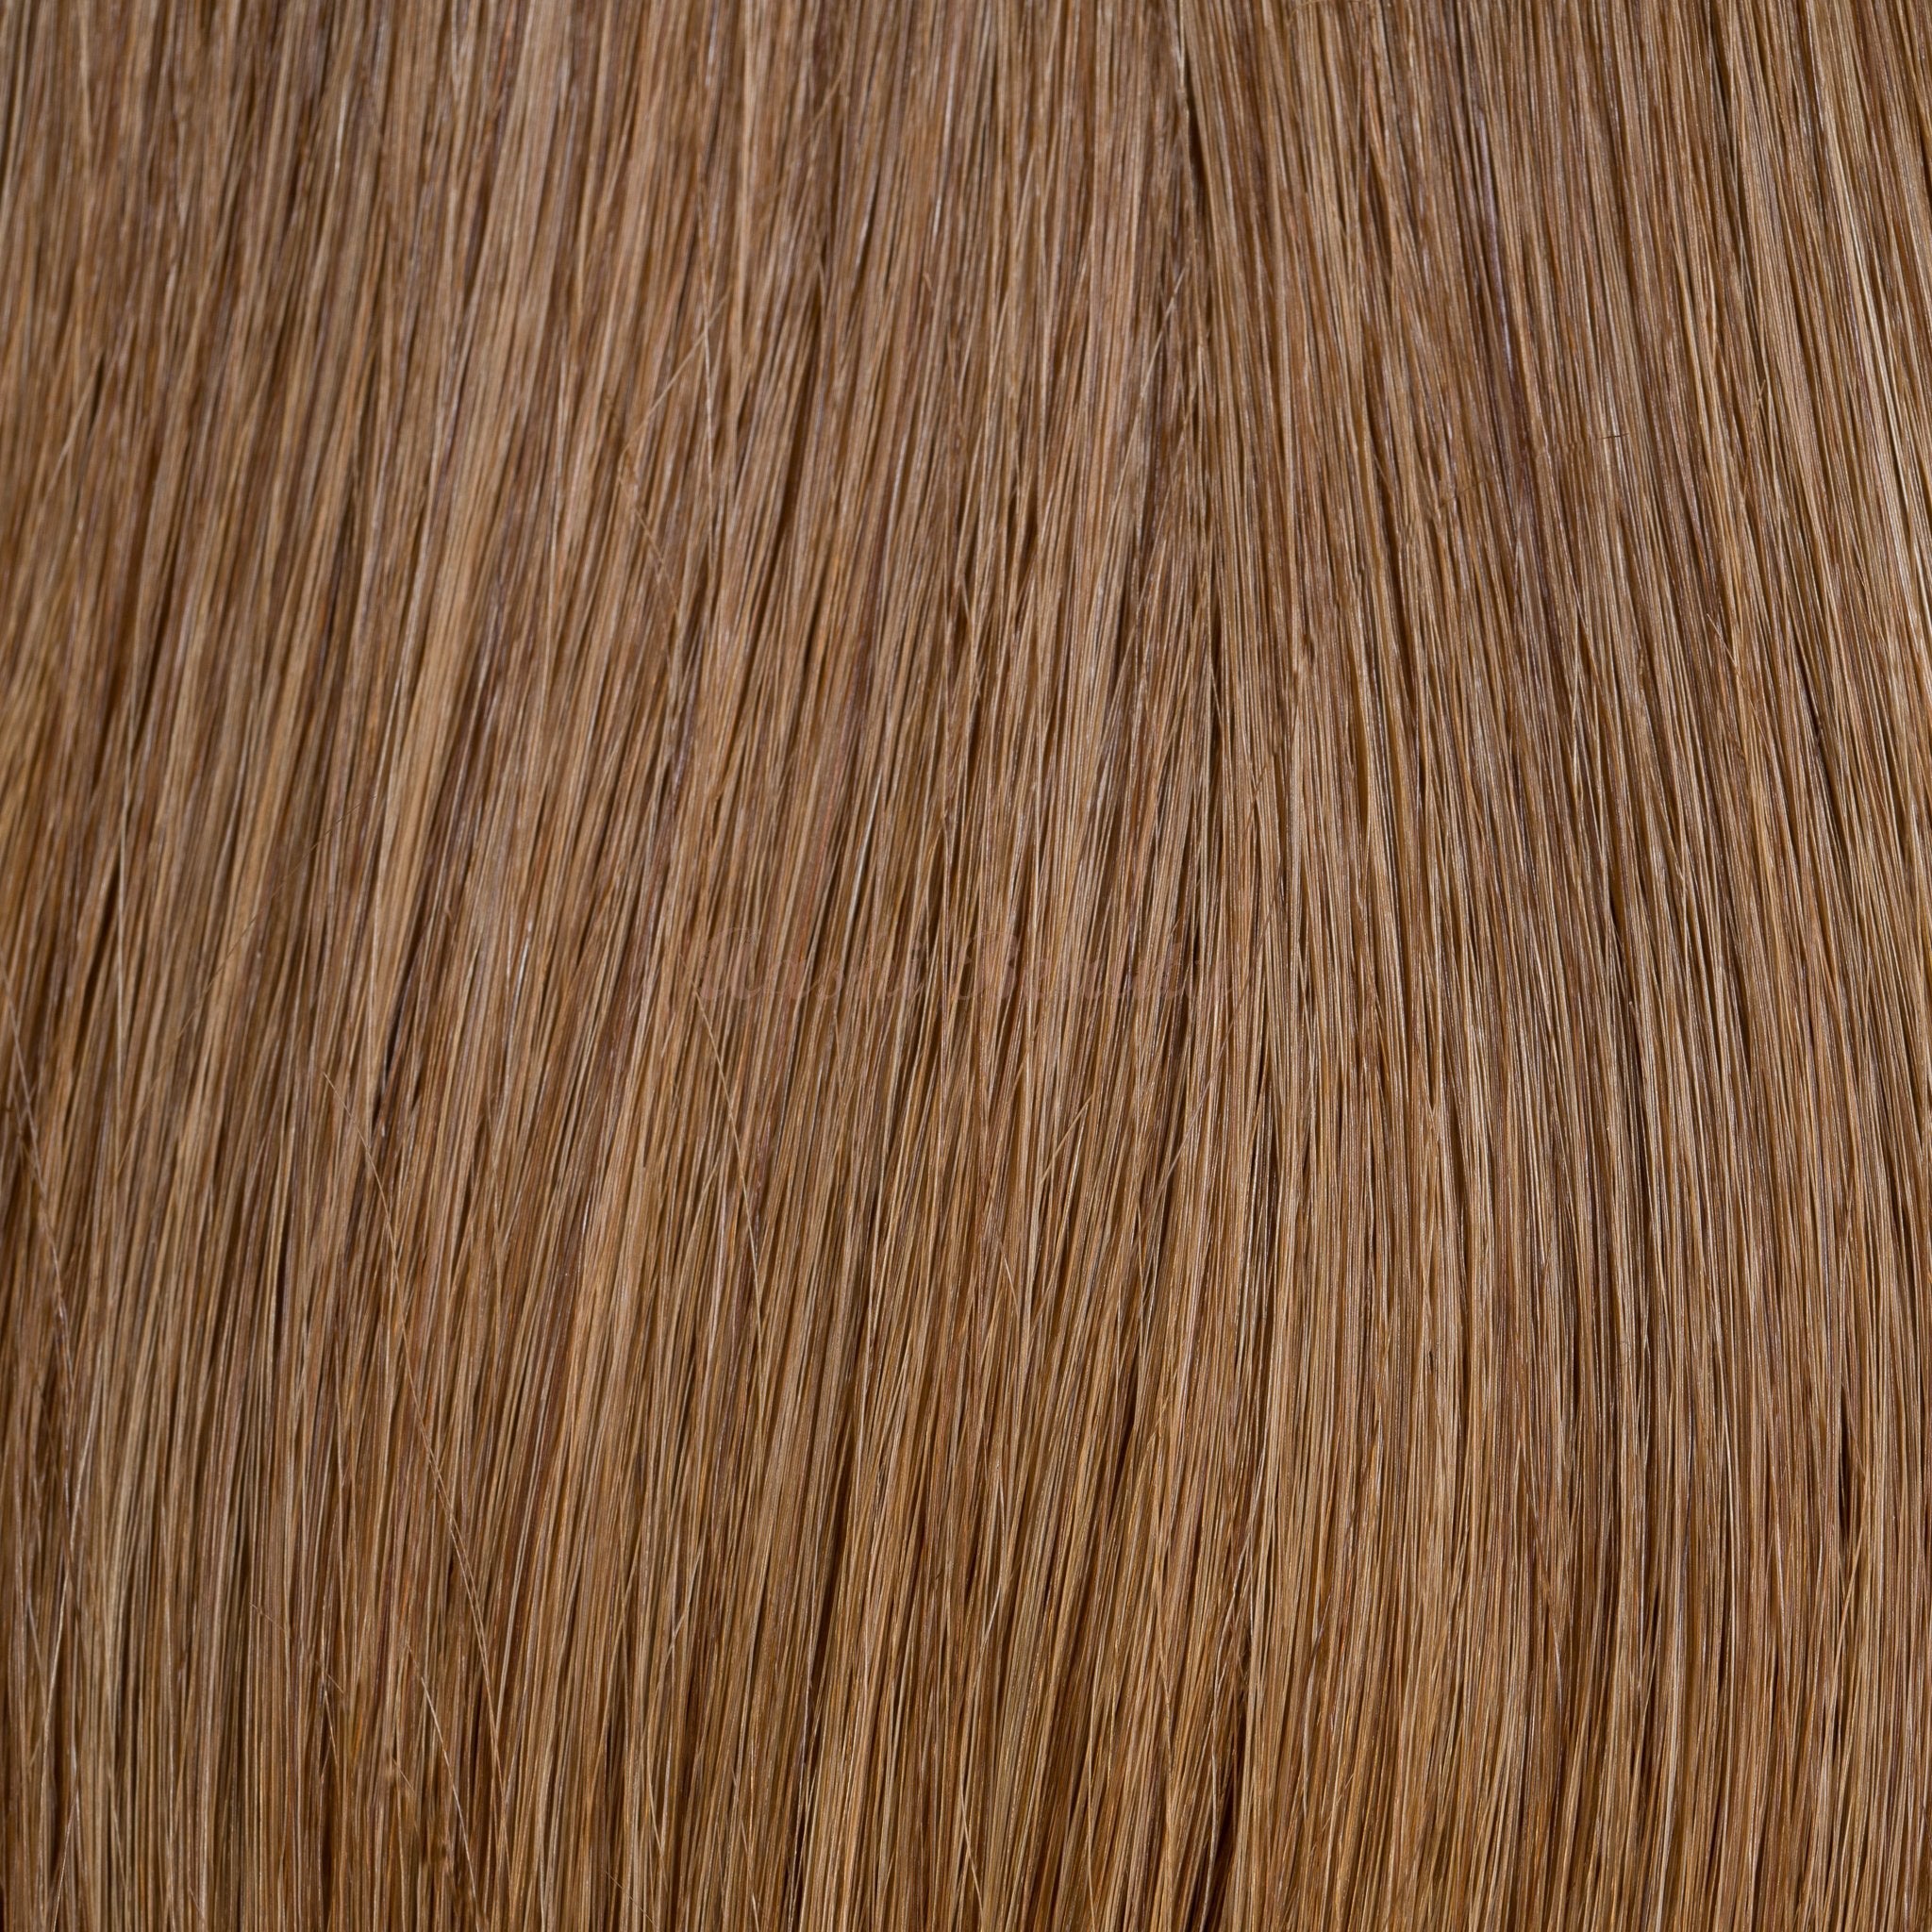 Mix of Golden Honey Brown (6) & Honey Blonde (12) (Naturally Drawn) Thin - Aashi Beauty